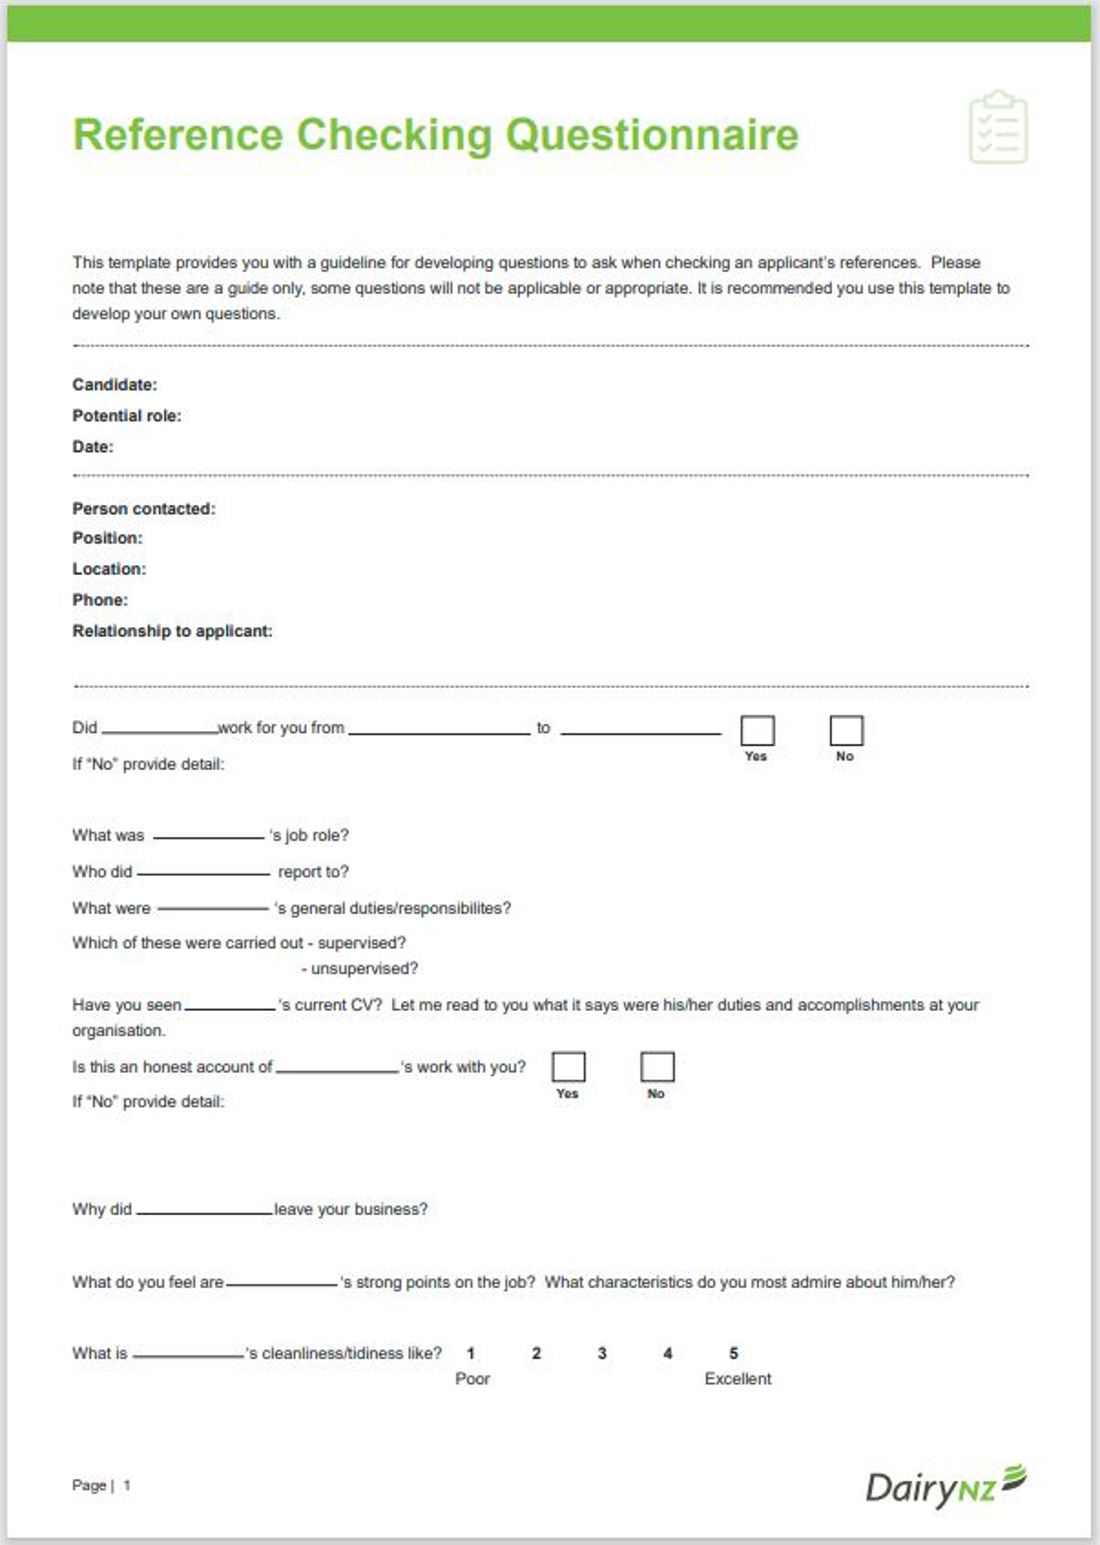 Reference Checking Questionnaire Image